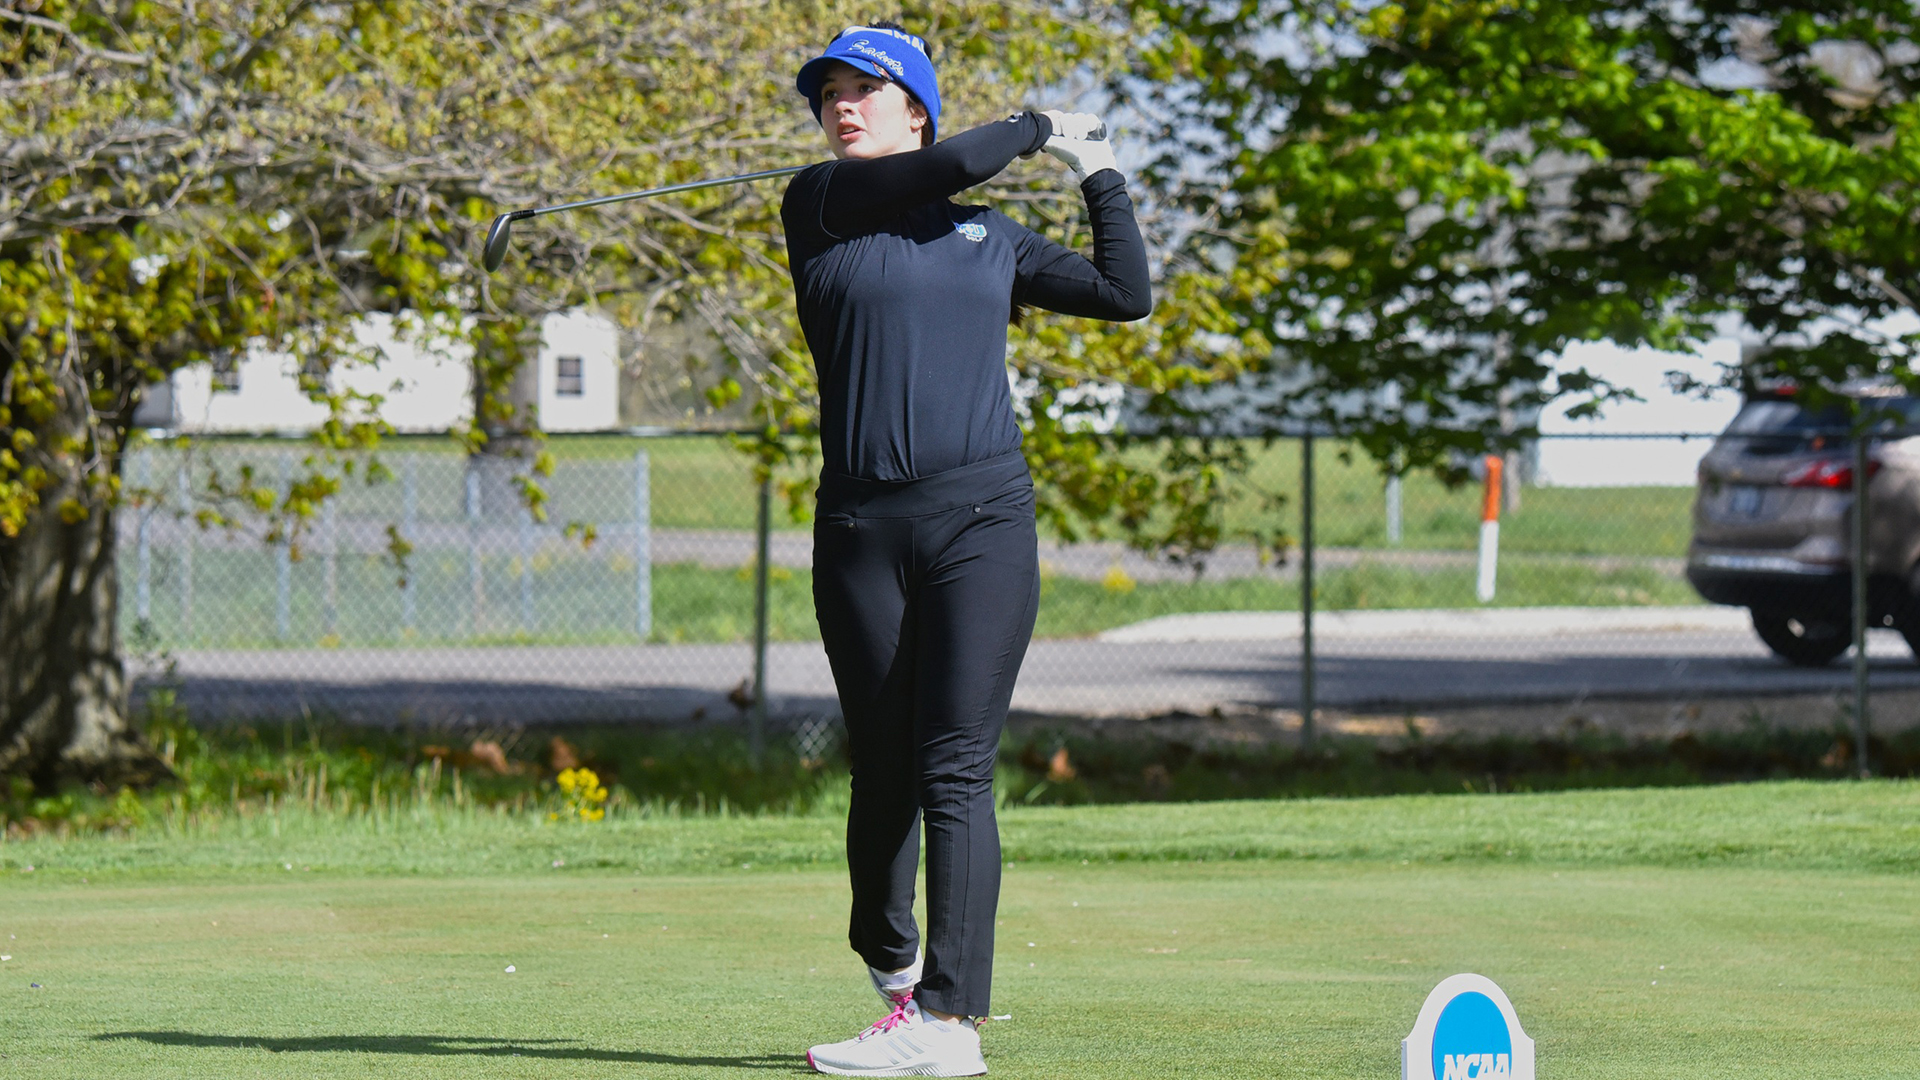 Marymount Women's Golf 22nd After Round One of NCAA Championship